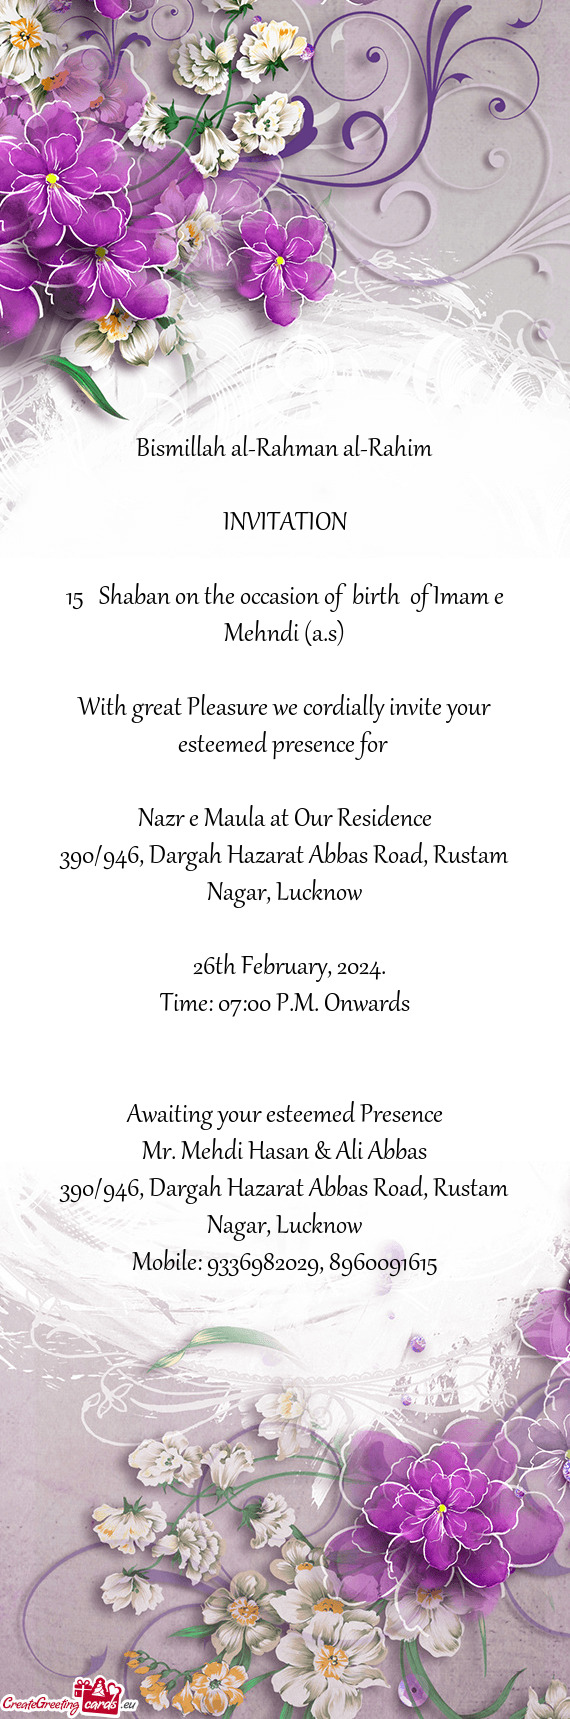 15 Shaban on the occasion of birth of Imam e Mehndi (a.s)